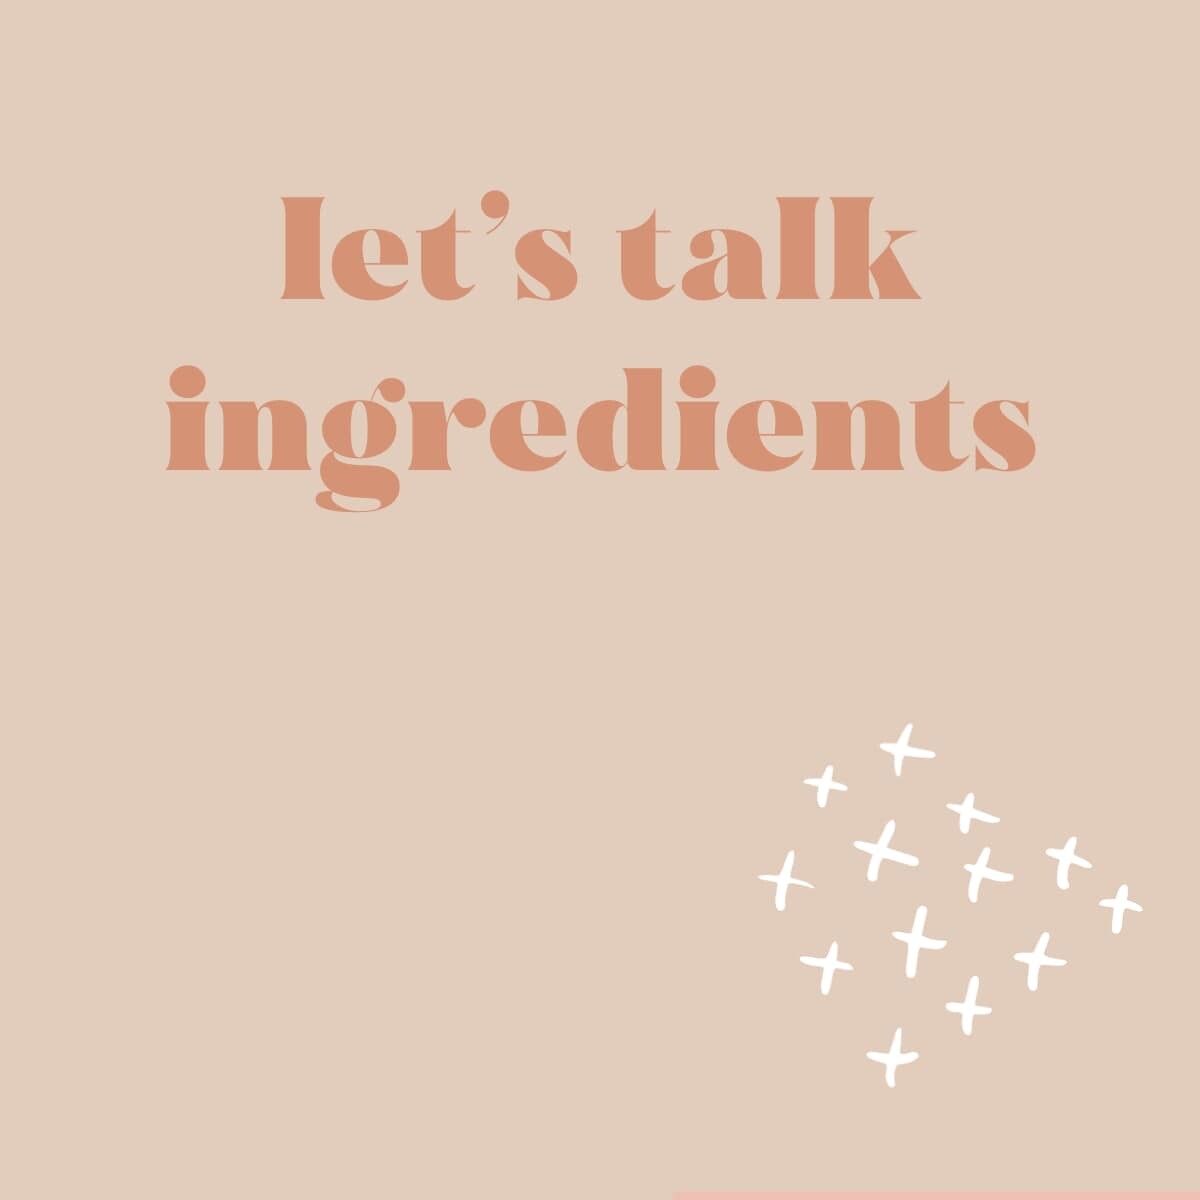 Let's Talk Ingredients and the 12 we avoid like the plague in our house...